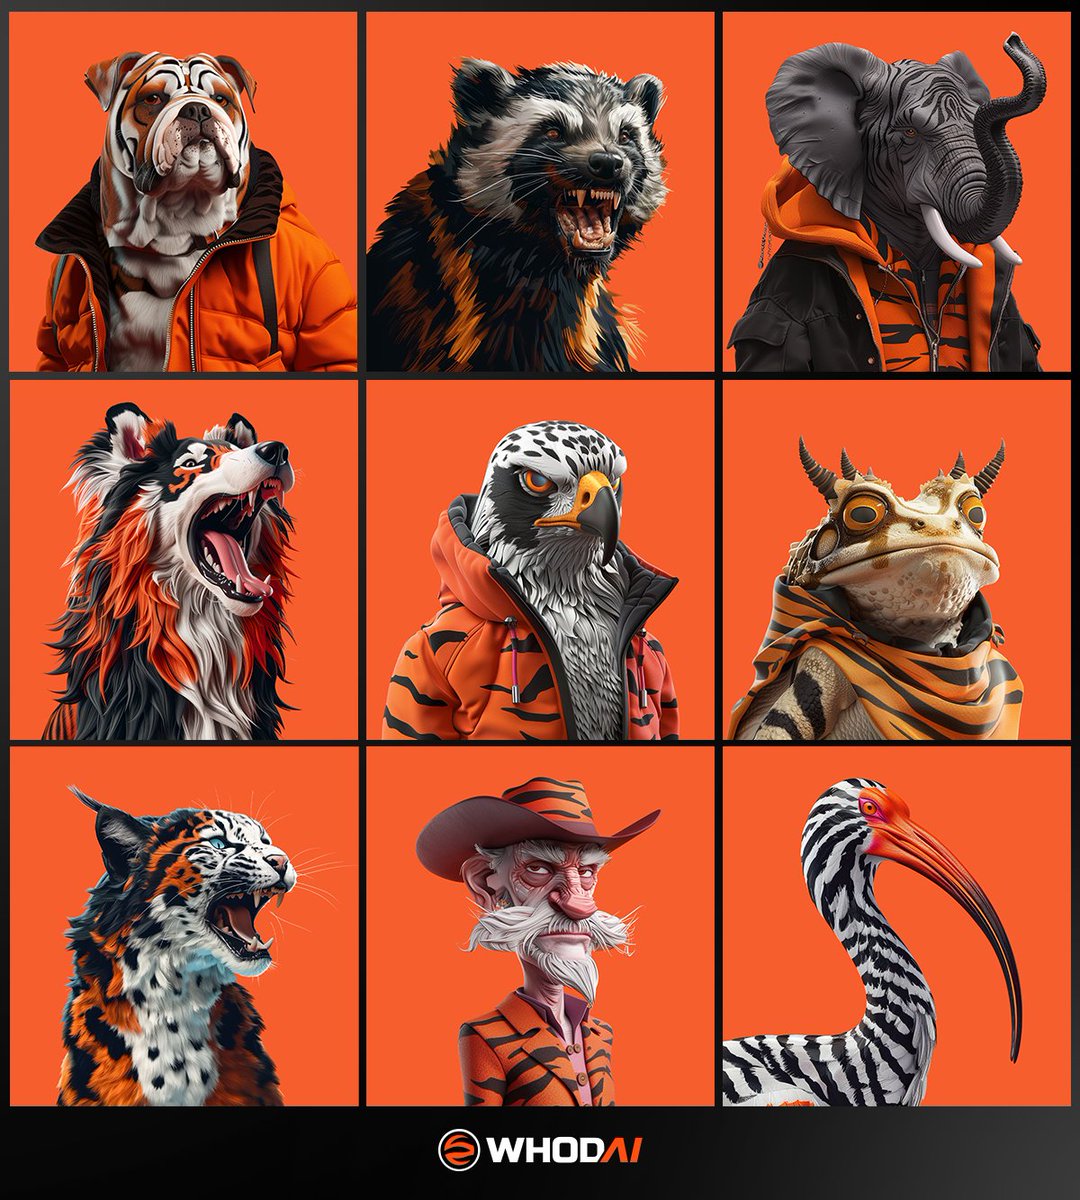 Rookie Mascots get their Stripes. WHO DEY!
#Bengals #whodey #RuleTheJungle #mascots #NFL #NFLTwitter #ncaafootball